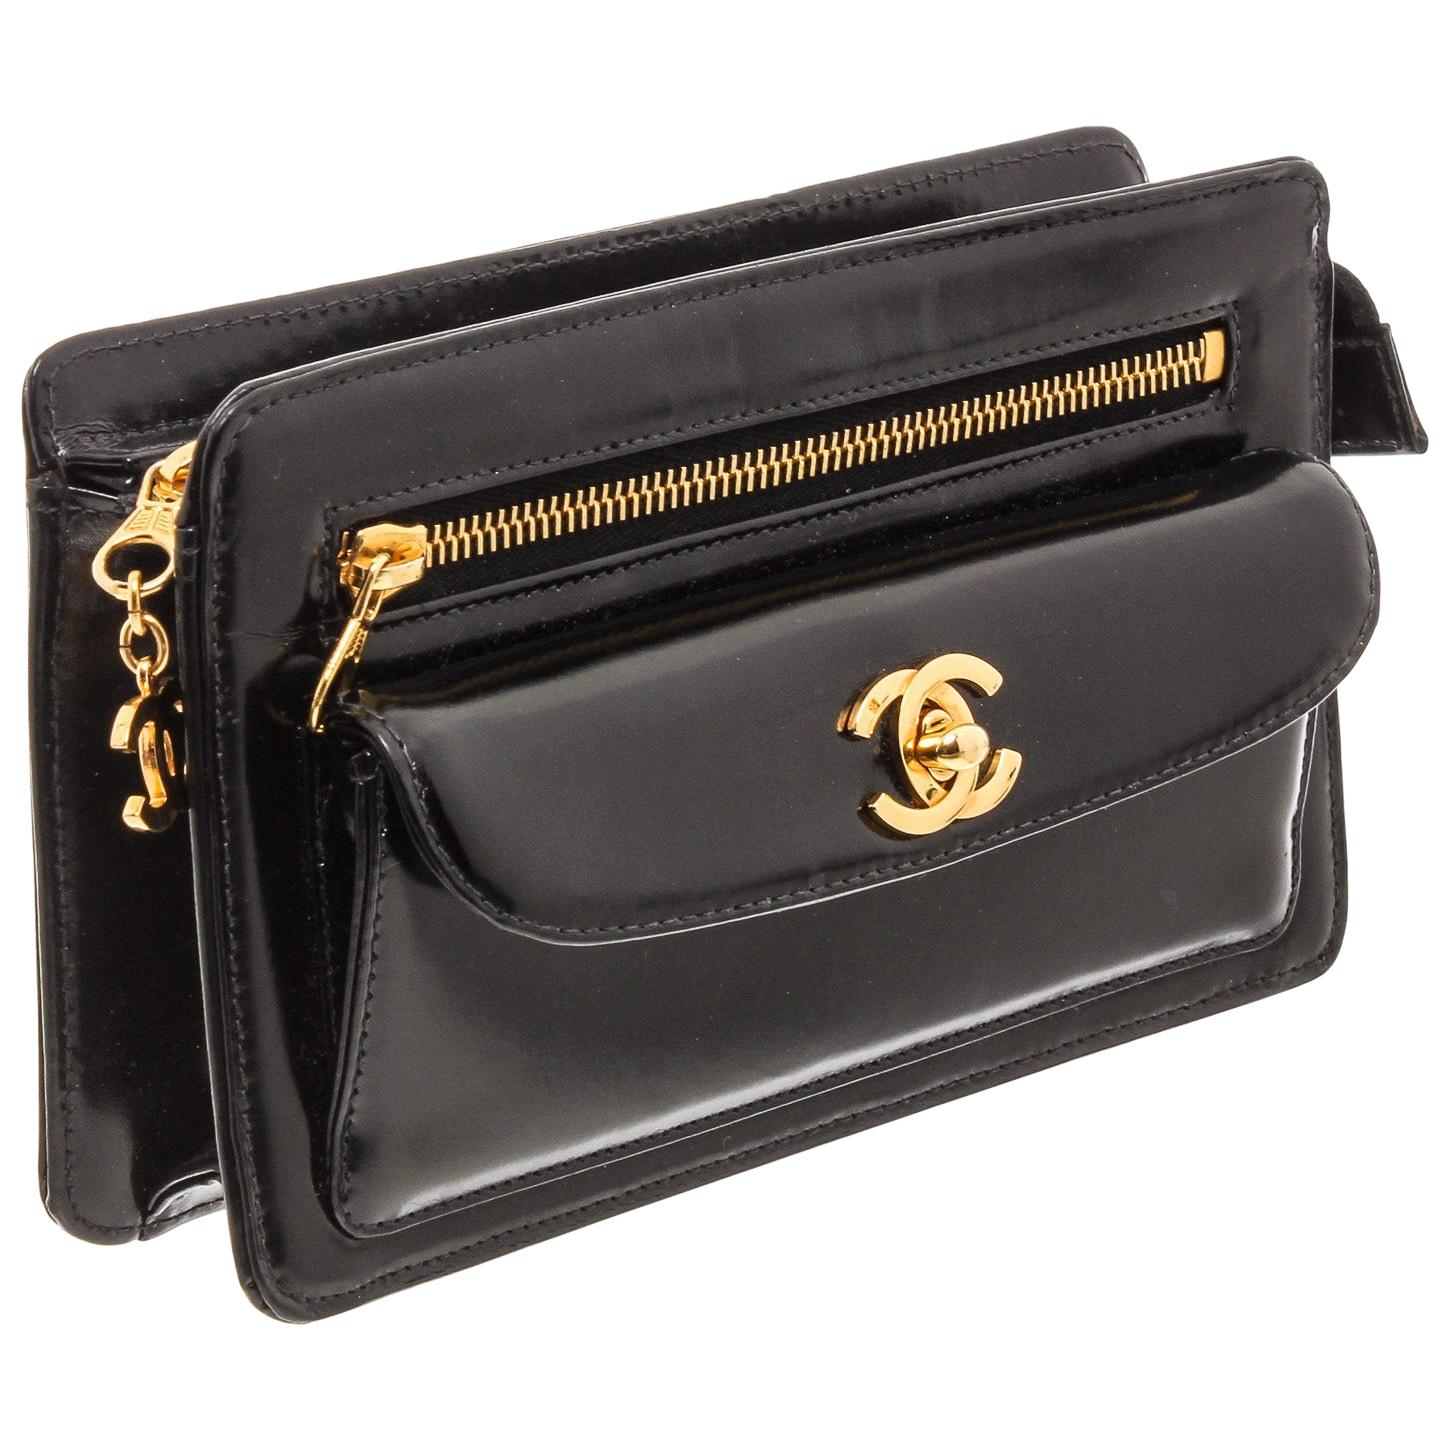 Patent leather clutch bag Chanel Black in Patent leather - 26557720